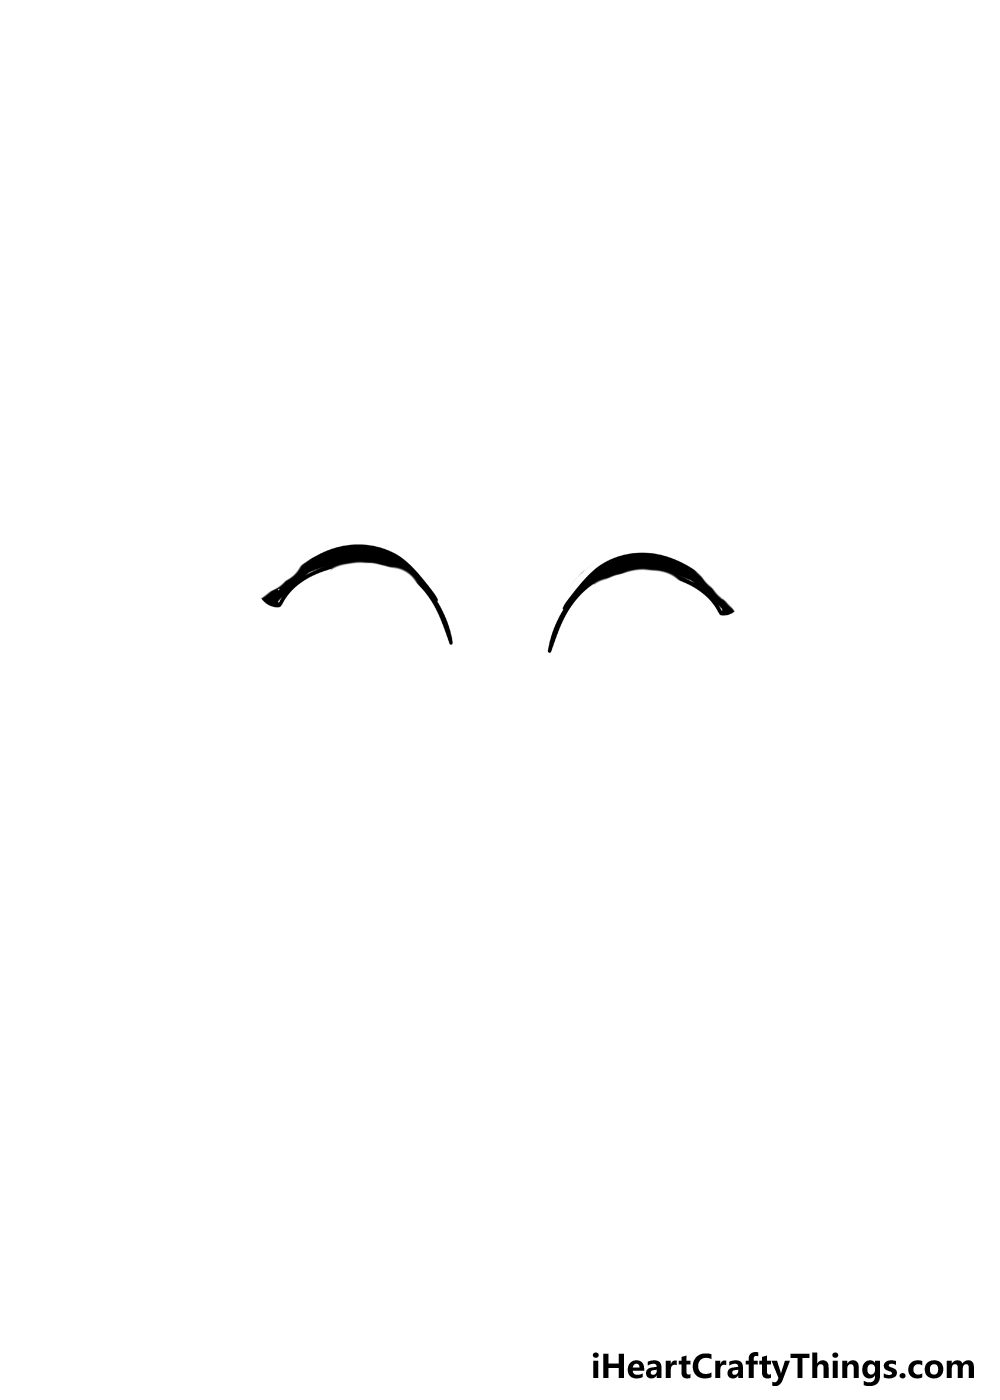 How to Draw Anime Eyes step 1